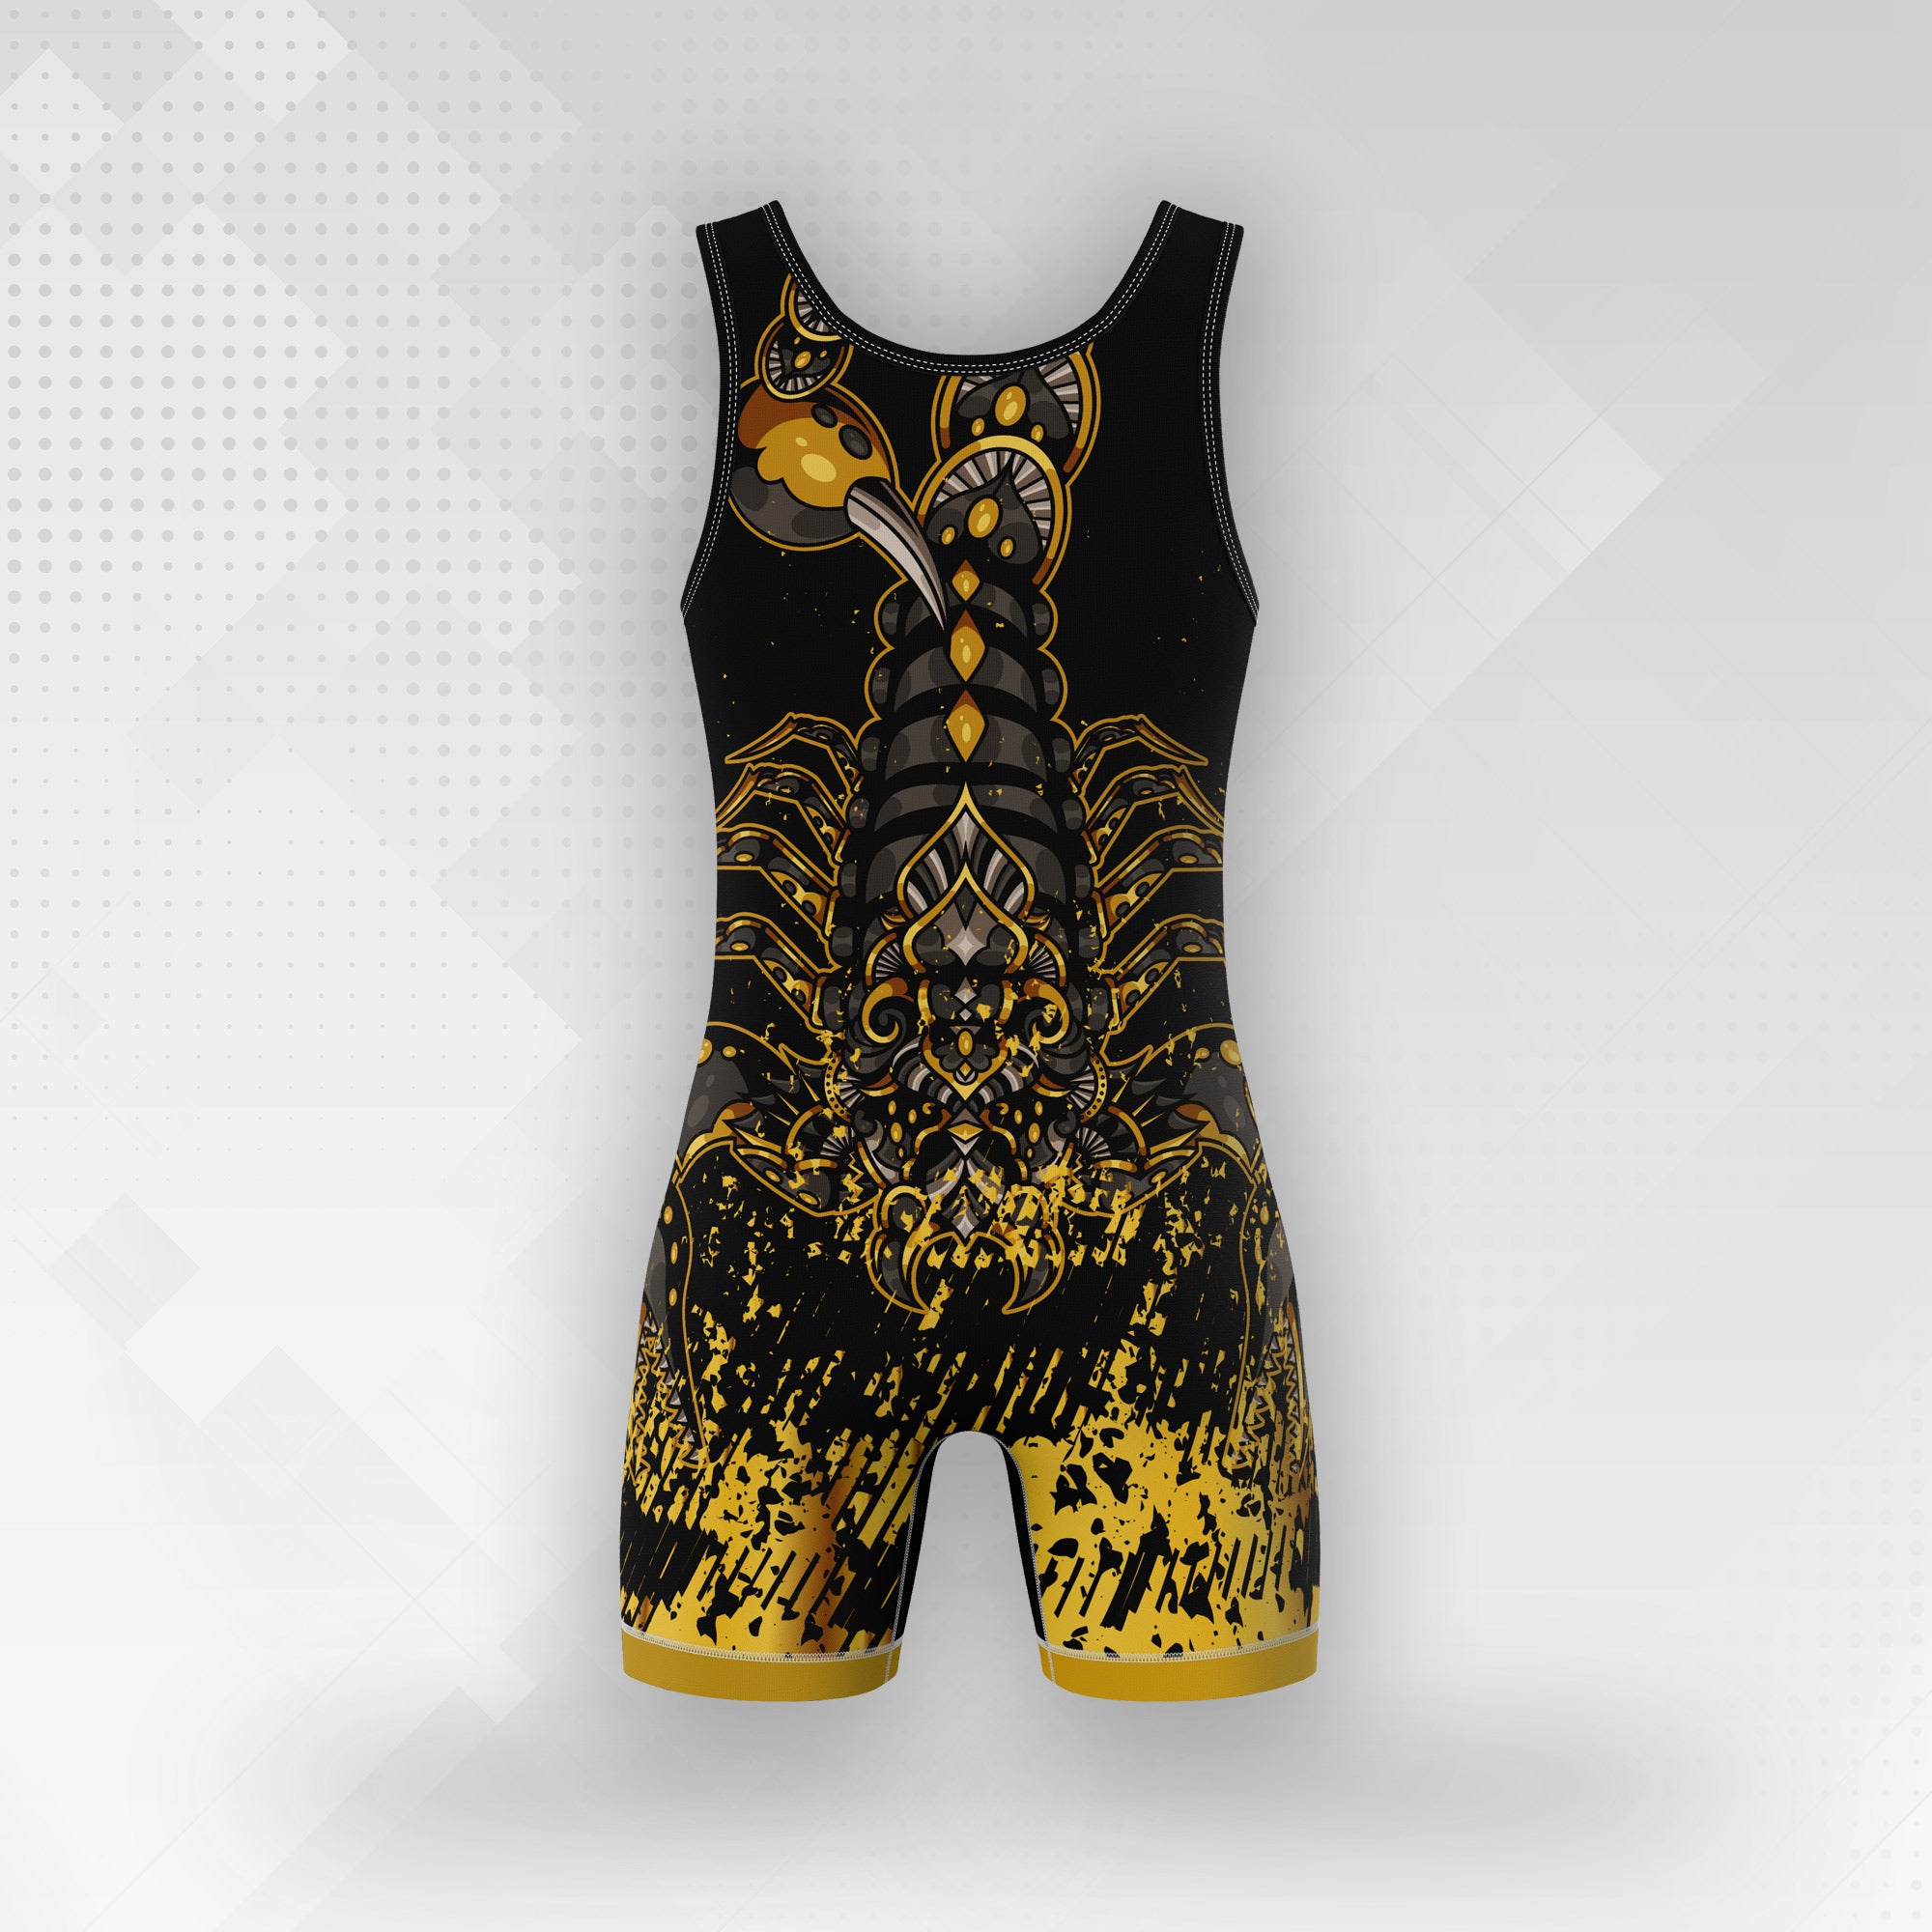 Fully Sublimated Warrior Singlet Xtreme Pro Apparel